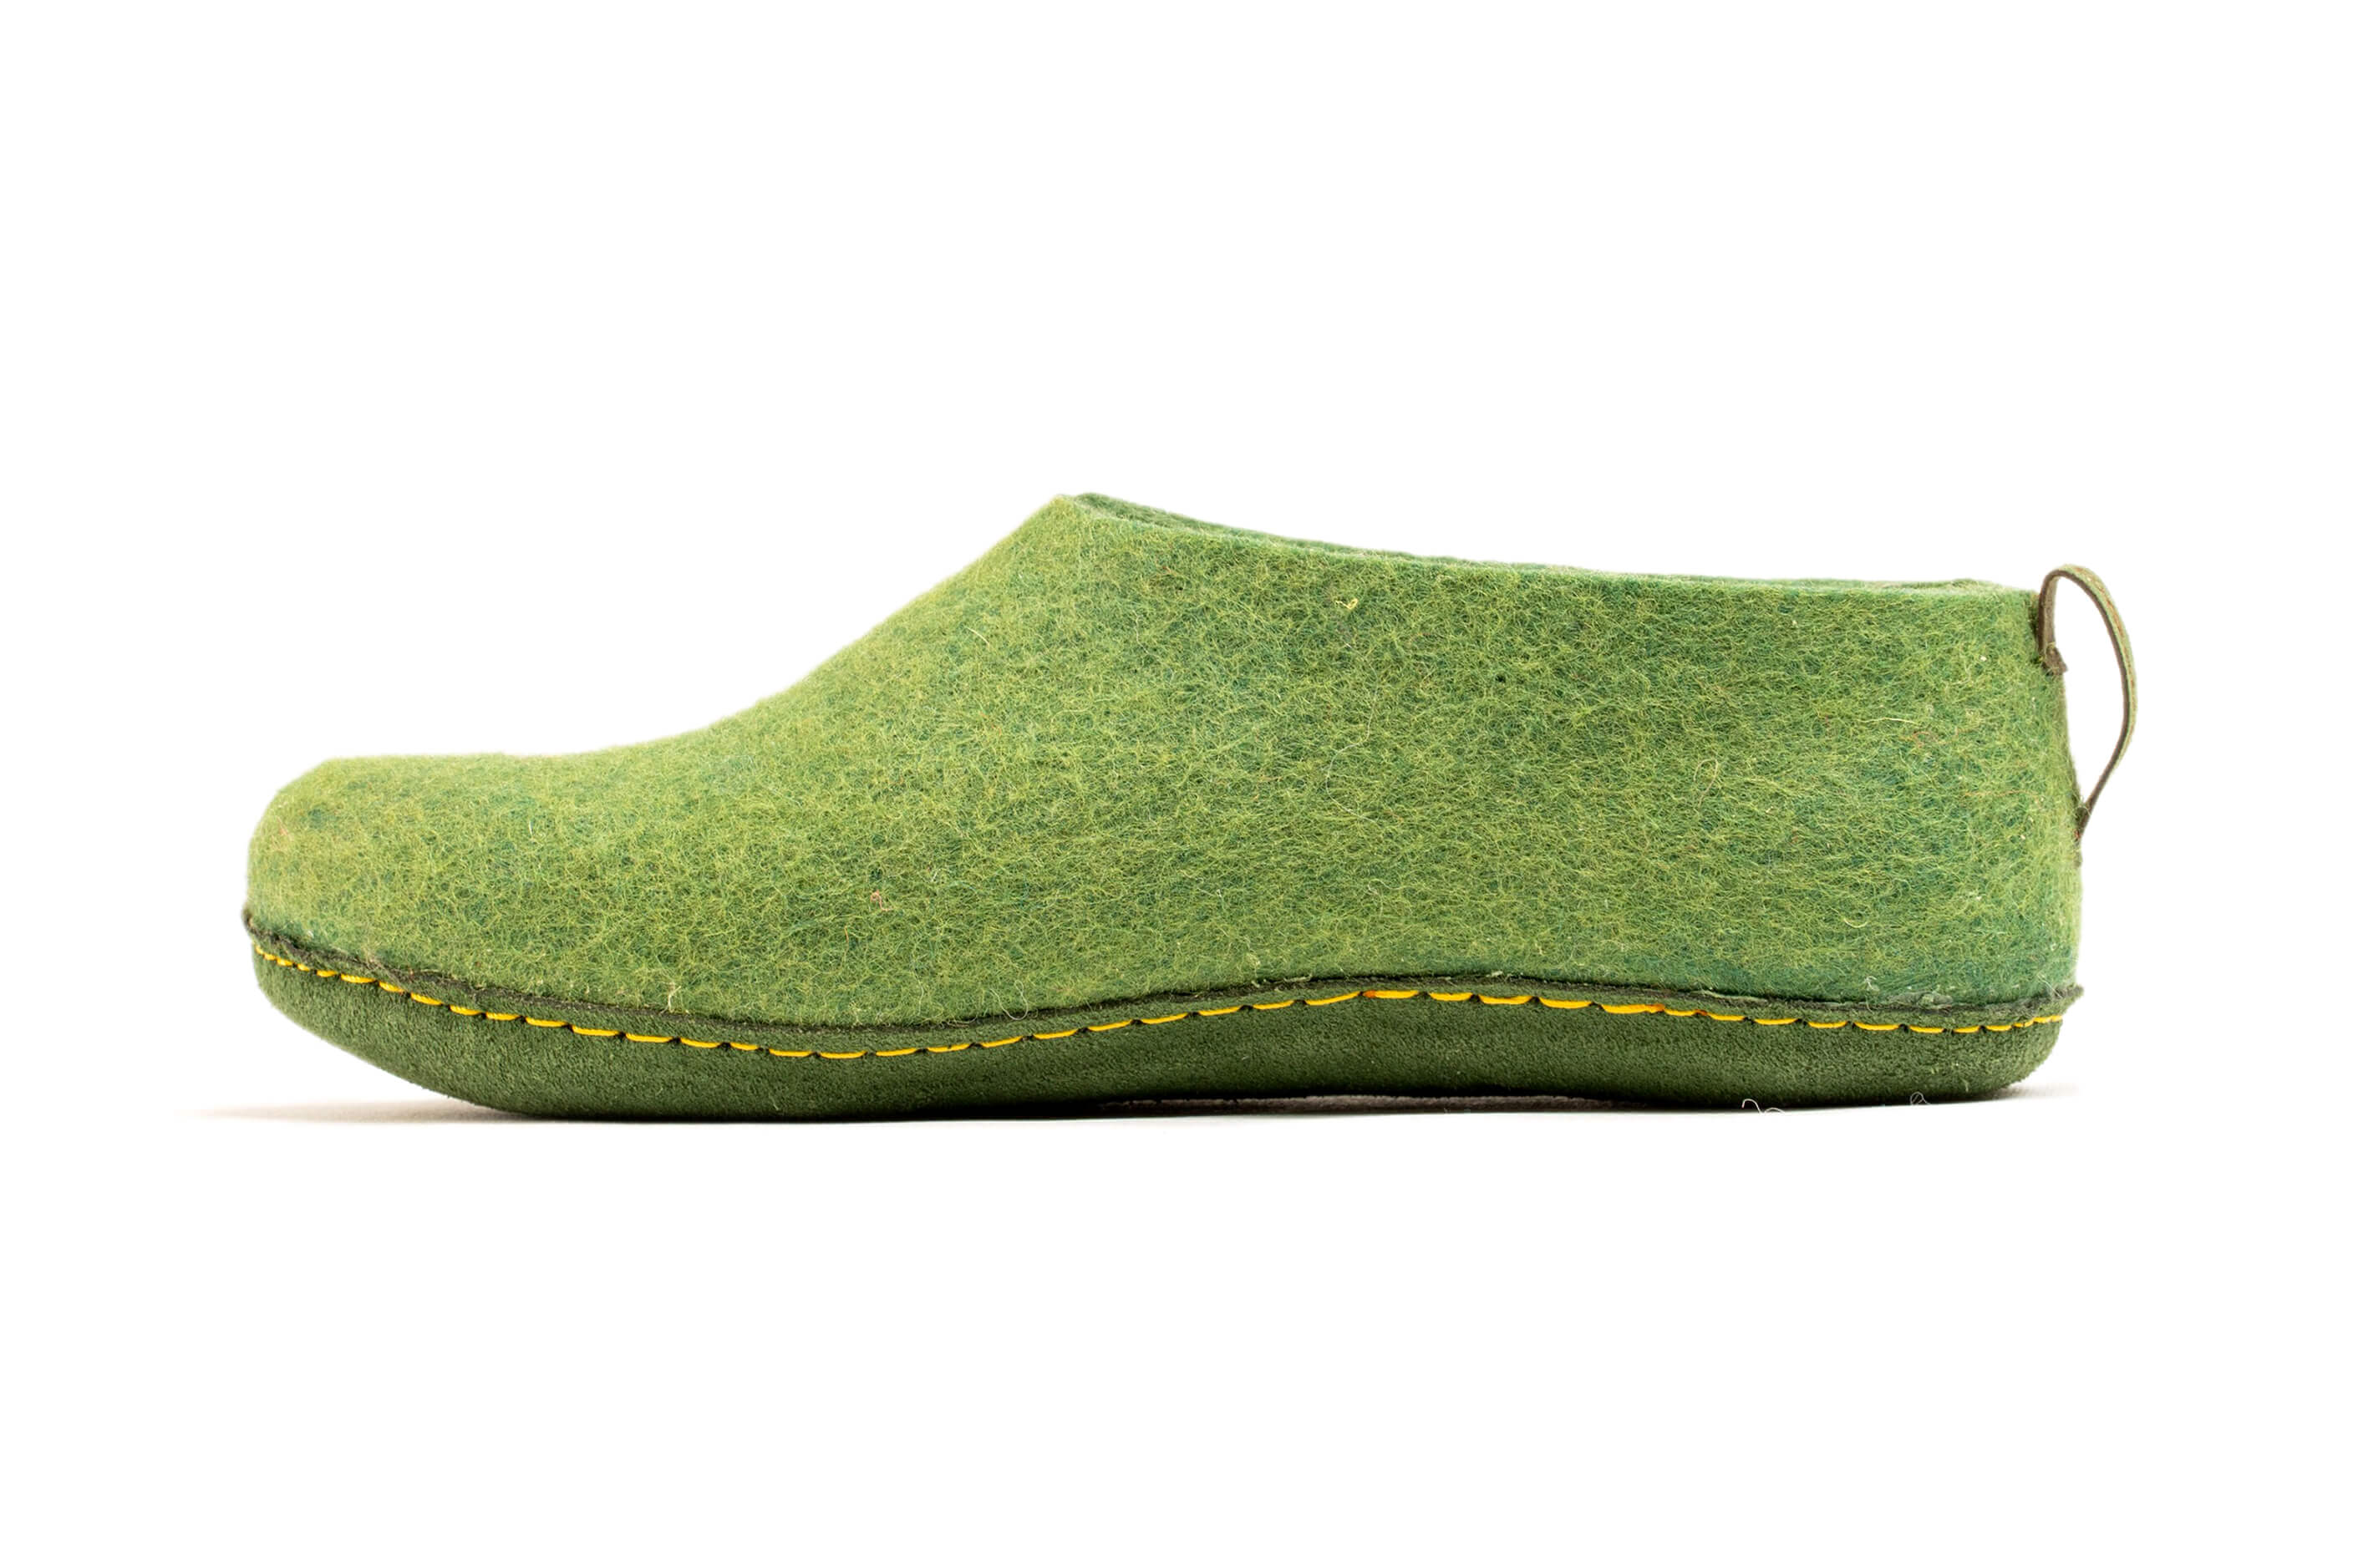 Indoor Shoes With Leather Sole - Green